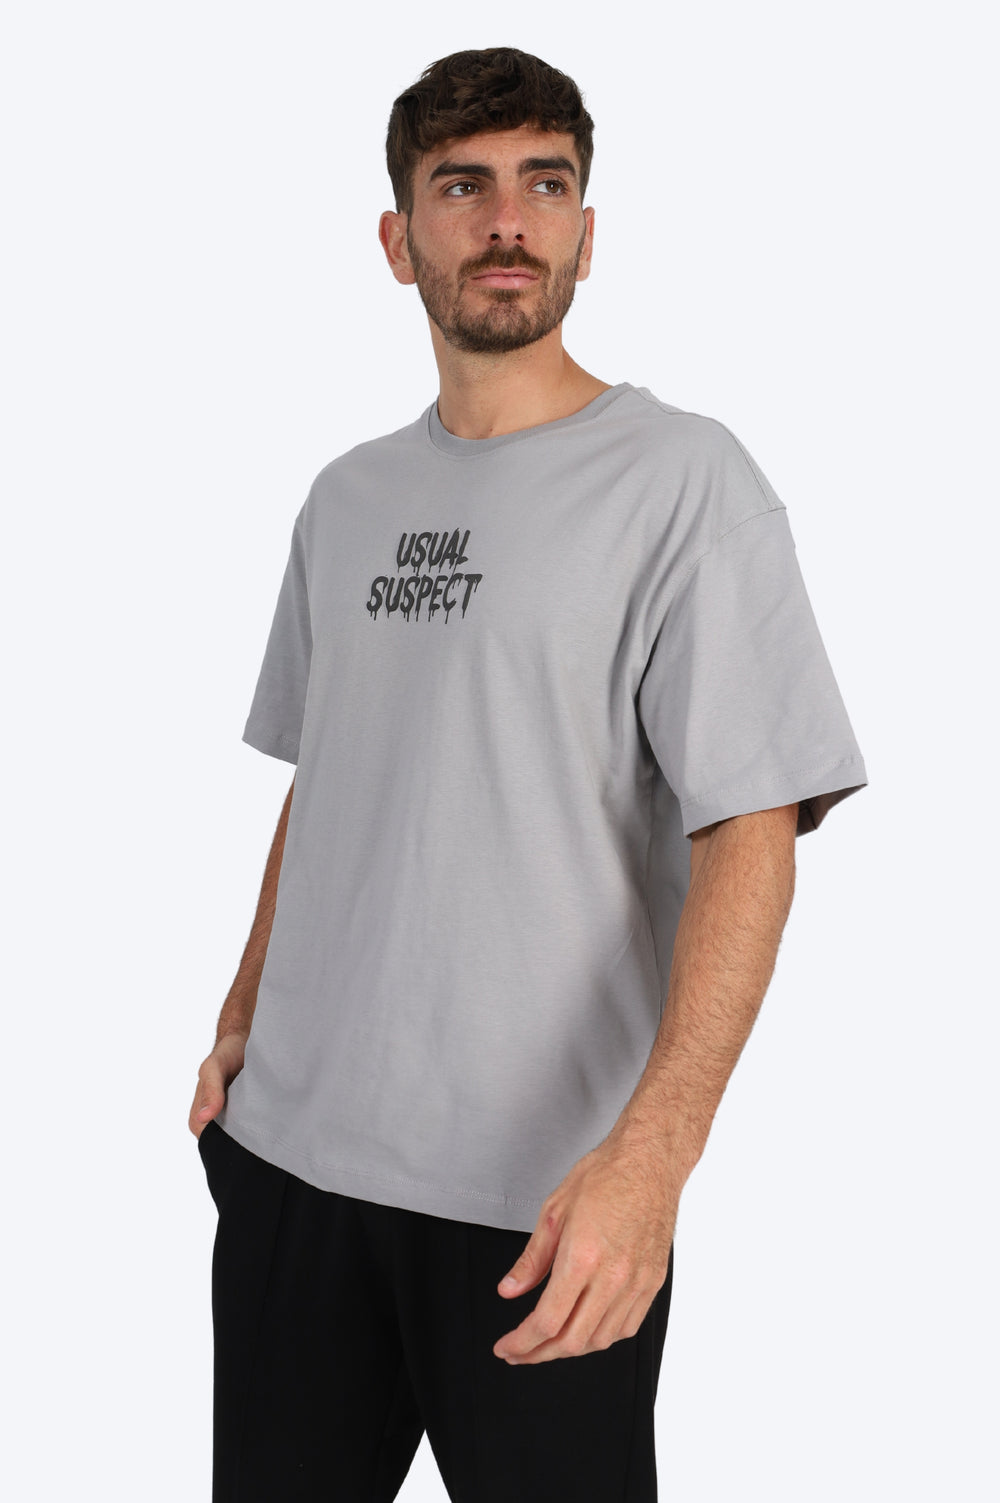 T-SHIRT USUAL SUSPECT - GRIS